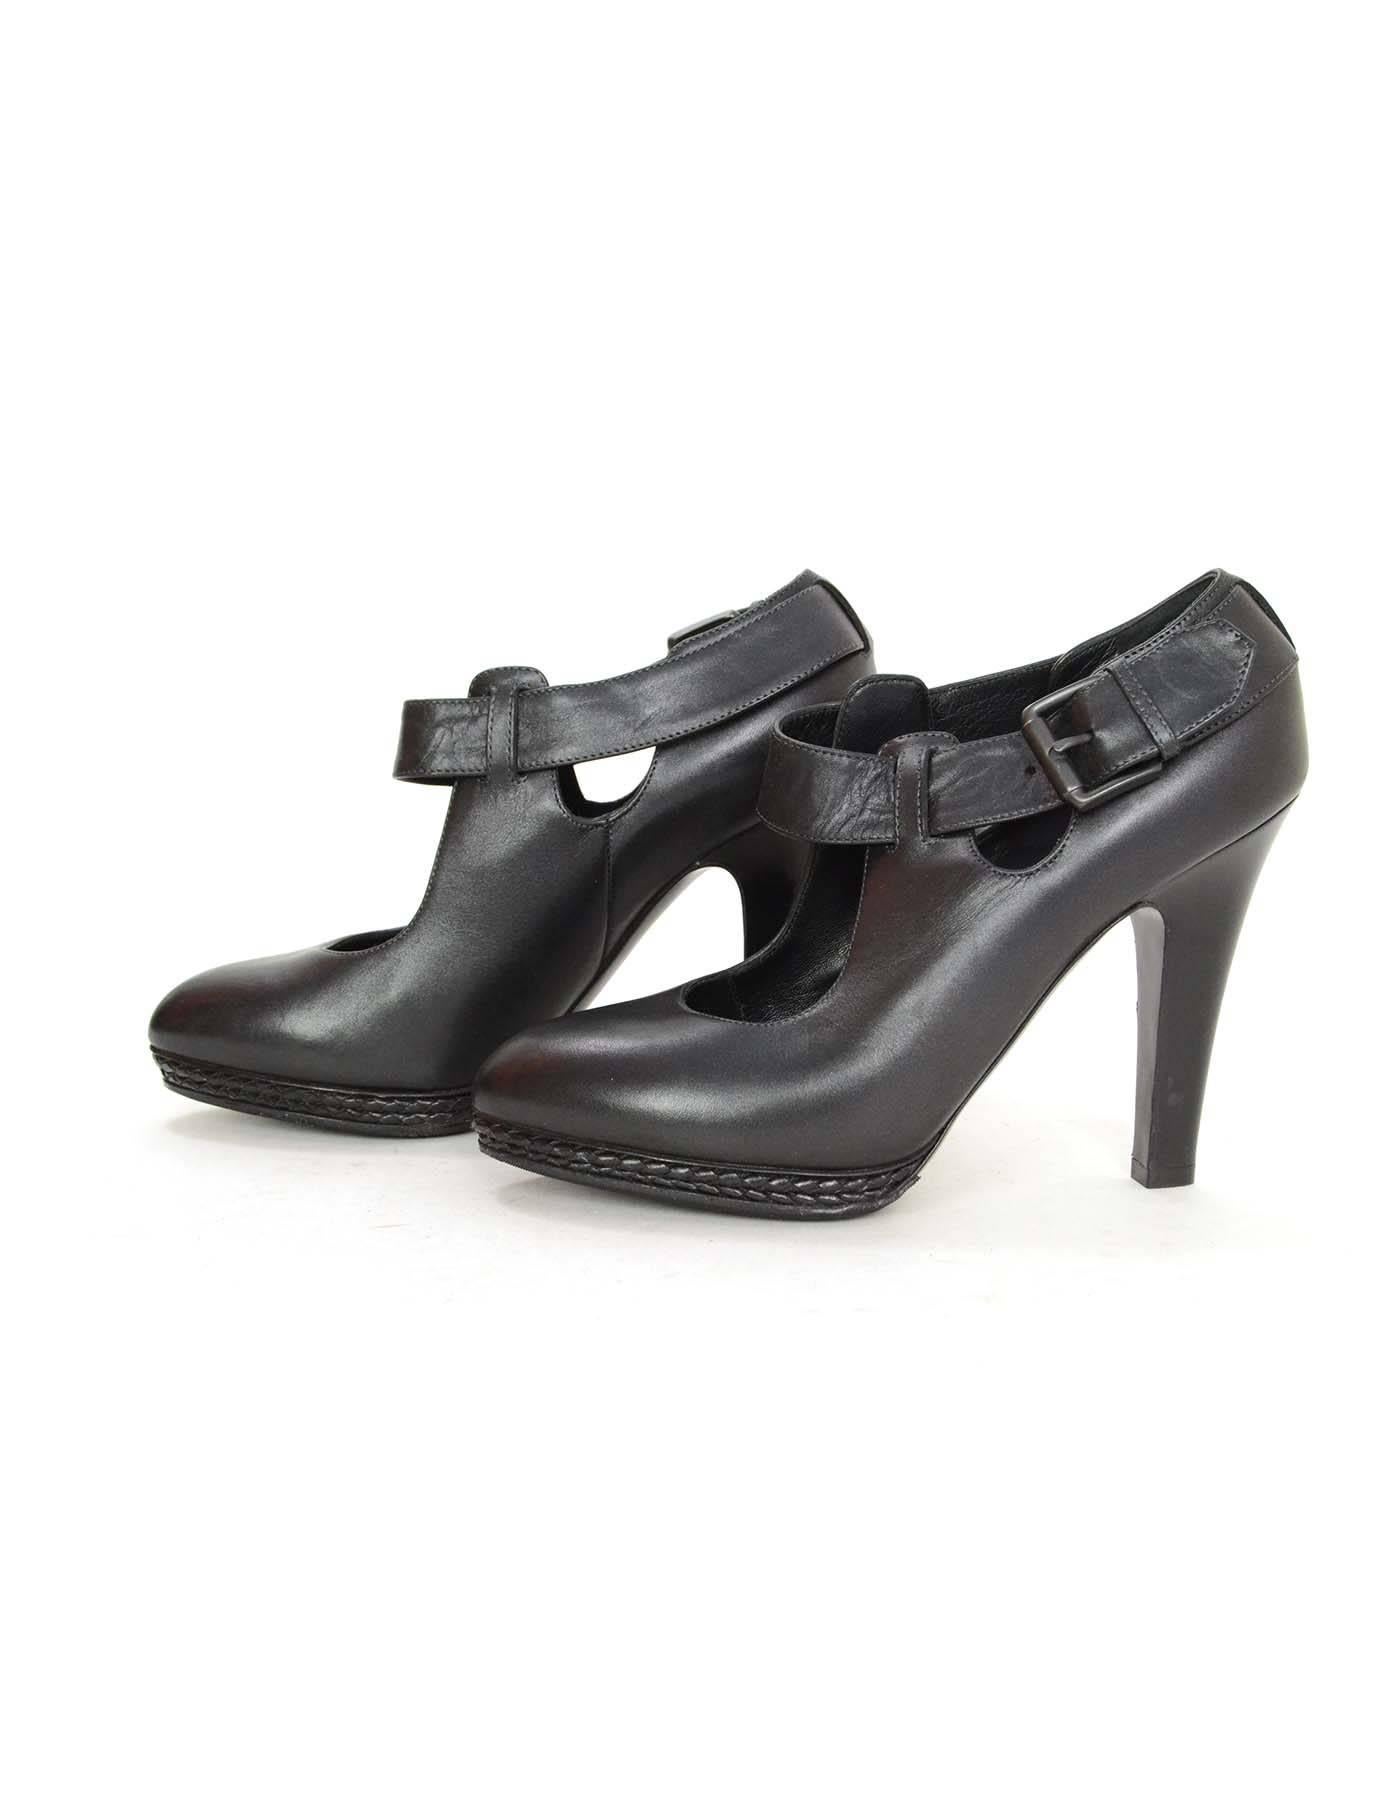 Bottega Veneta Black Leather Pumps 
Features black leather ankle buckle strap
Made In: Italy
Color: Black
Materials: Leather
Closure/Opening: Ankle strap with buckle and notch closure
Sole Stamp: Bottega Veneta 37 1/2 Made In Italy
Overall